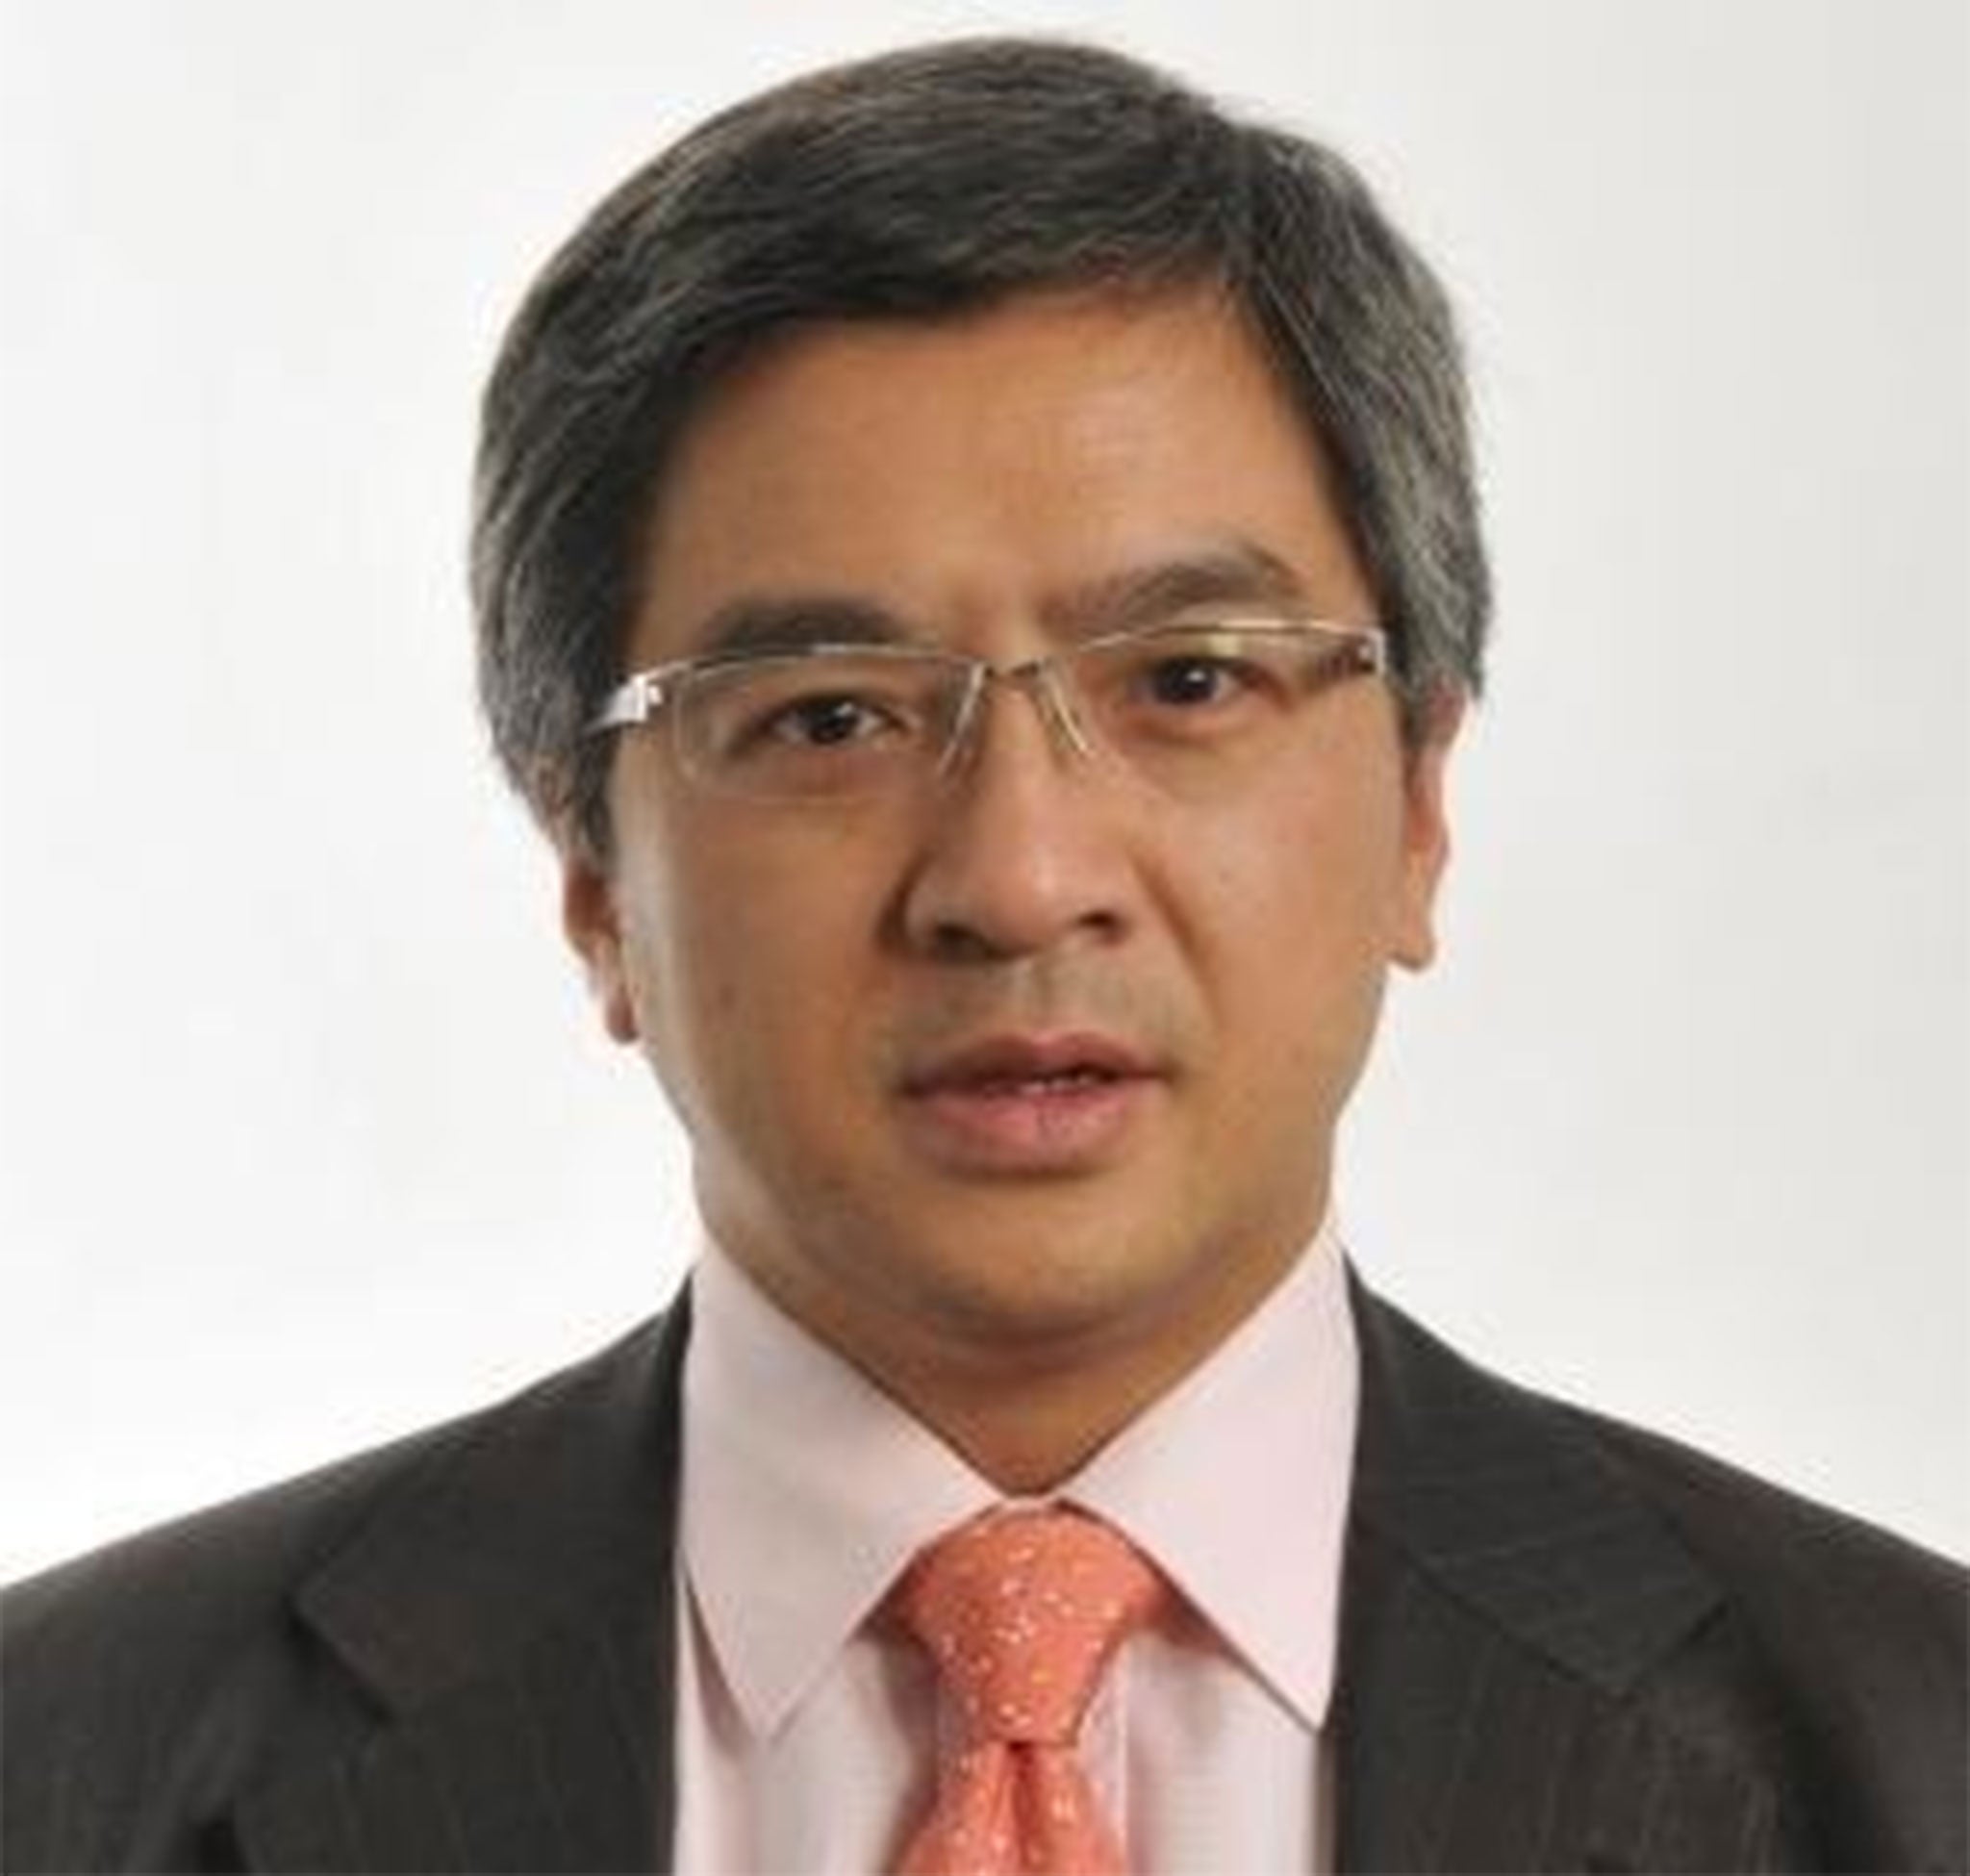 Chi Man Choi, identified in the passenger manifest for QZ8501, was the managing director for a branch of an Indonesian energy company